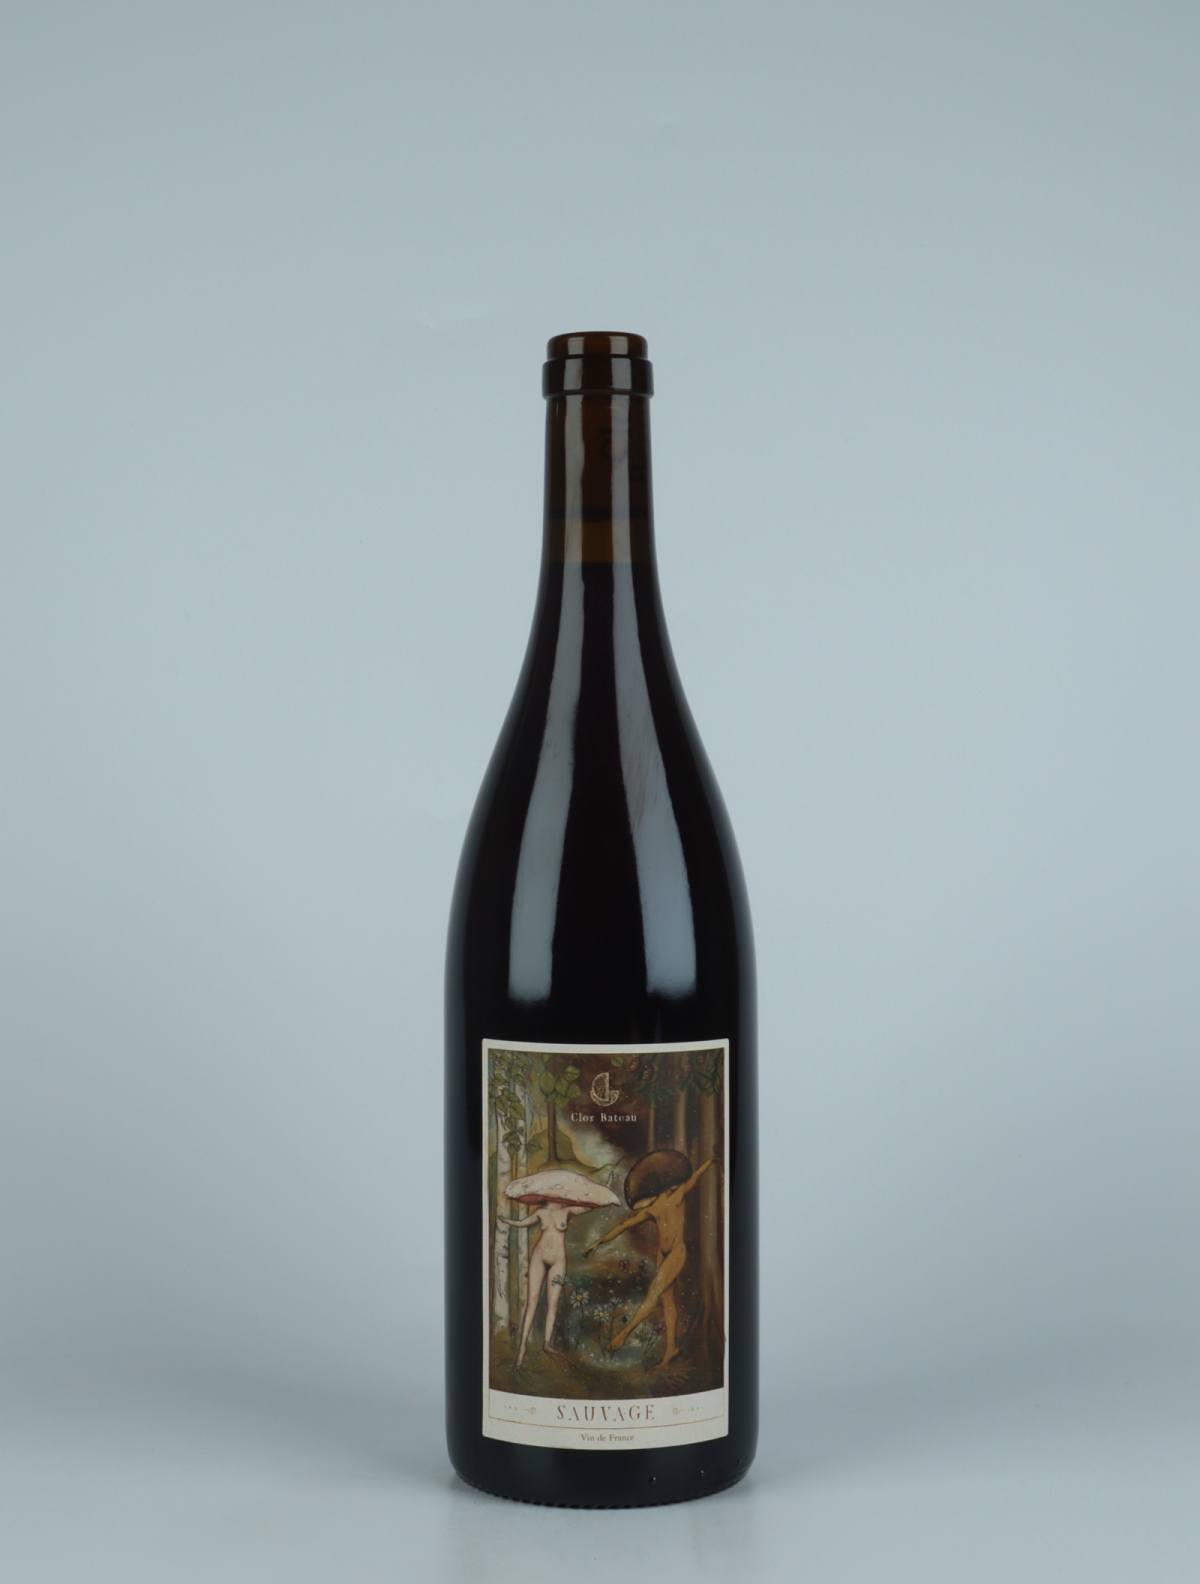 A bottle 2021 Sauvage Red wine from , Beaujolais in France